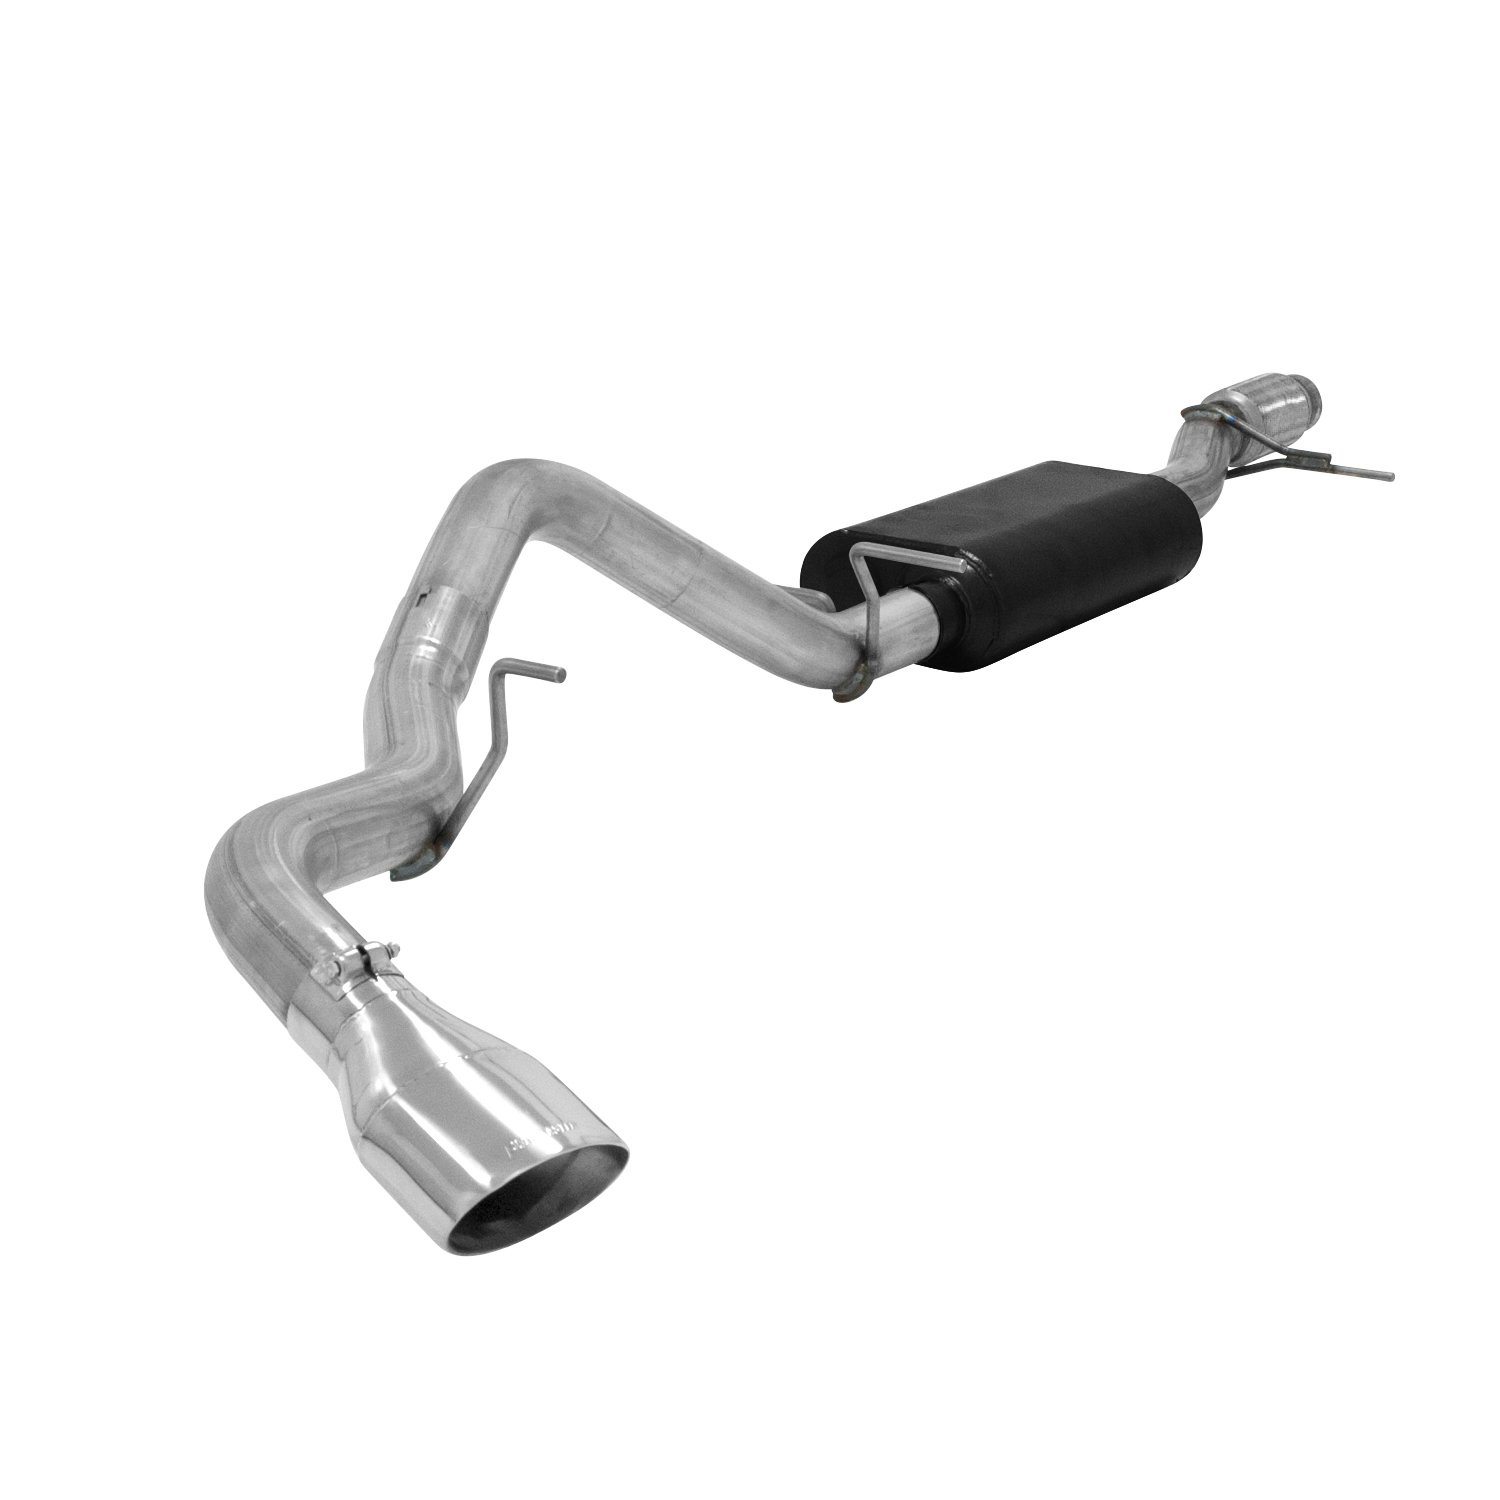 15-16 TAHOE/YUKON 5.3L CAT-BACK EXHAUST SYSTEM-SINGLE SIDE EXIT